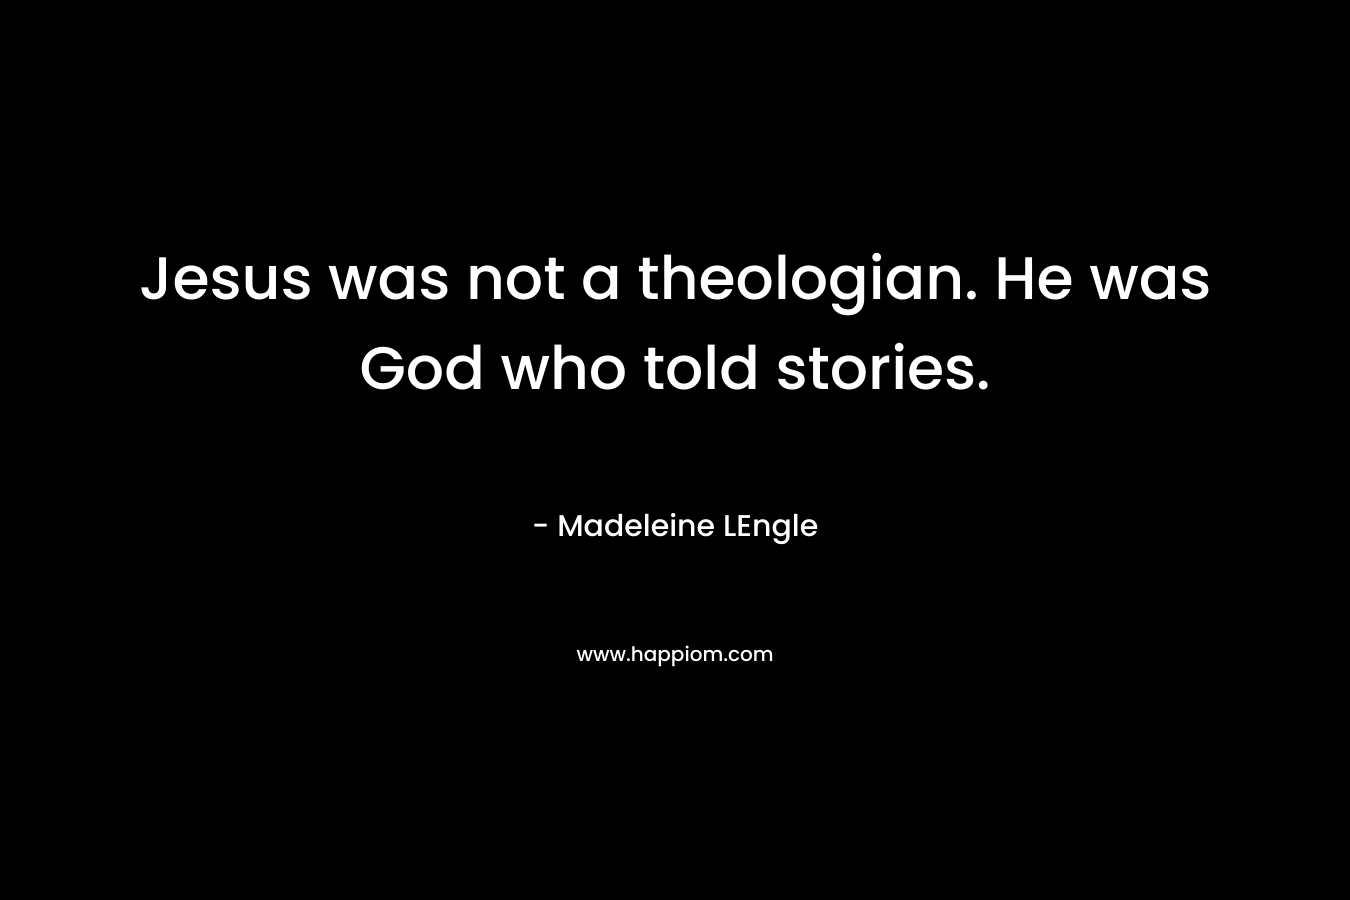 Jesus was not a theologian. He was God who told stories.